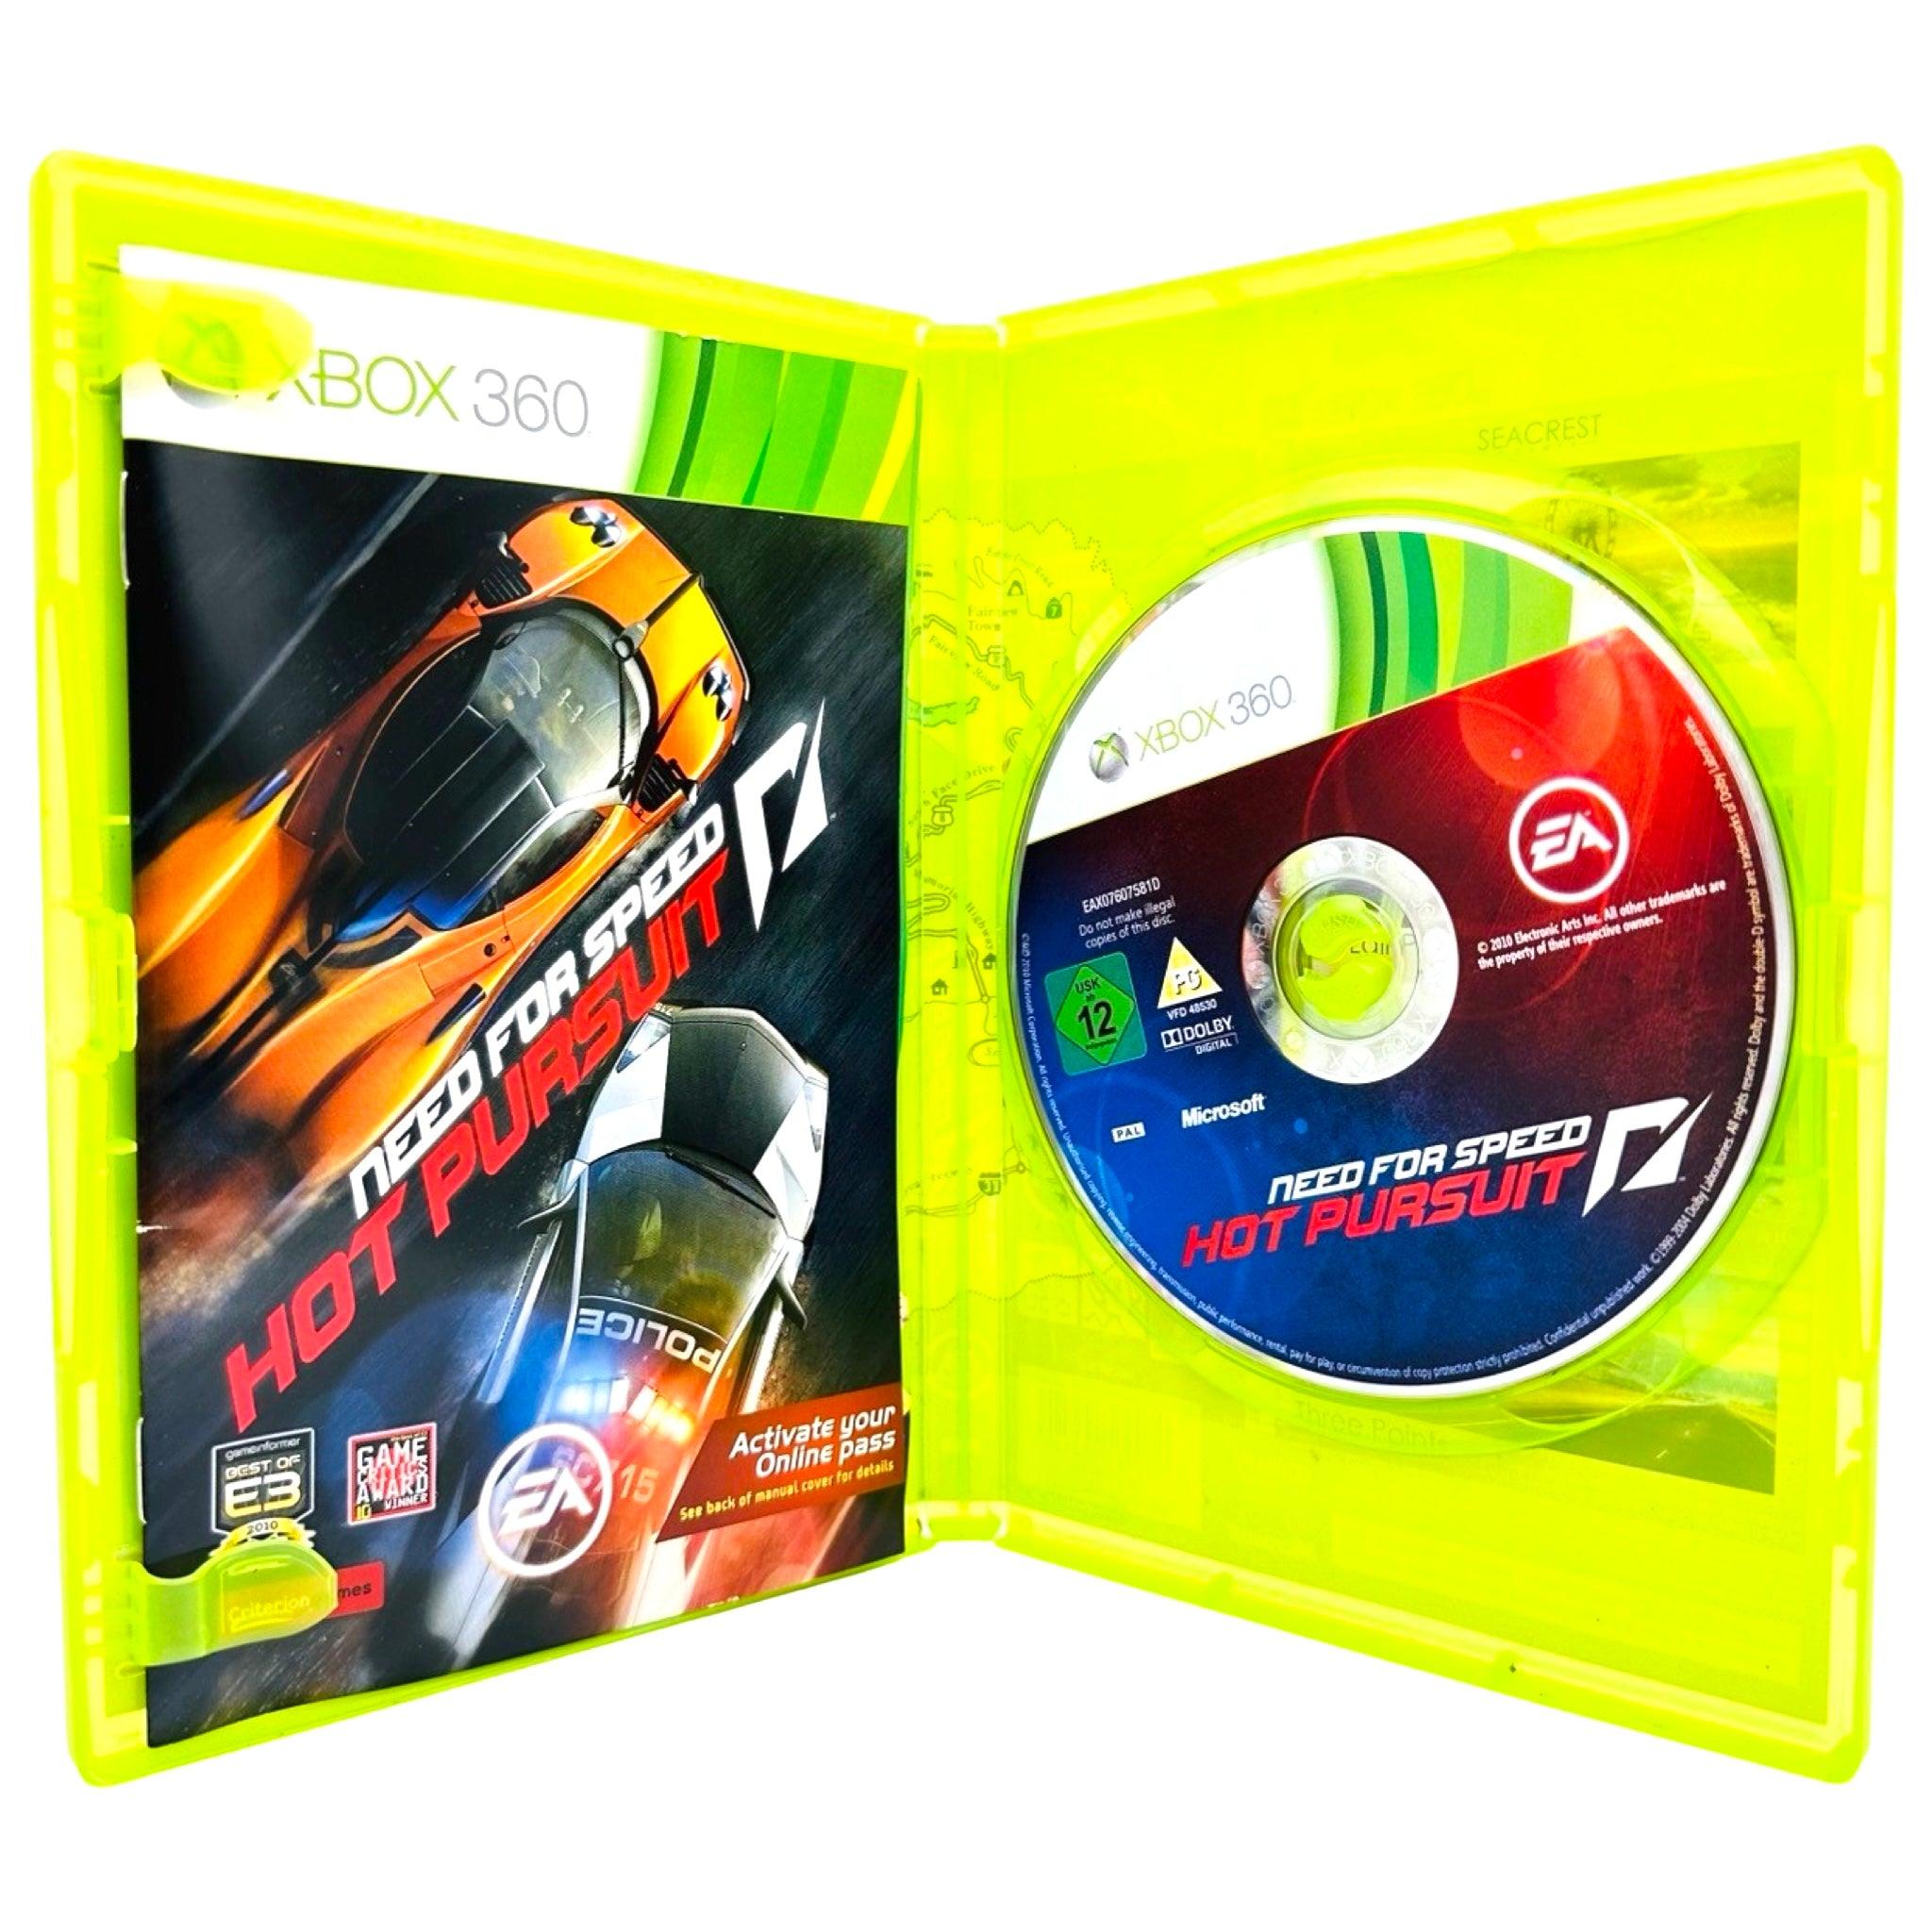 Xbox 360: Need For Speed: Hot Pursuit - RetroGaming.no